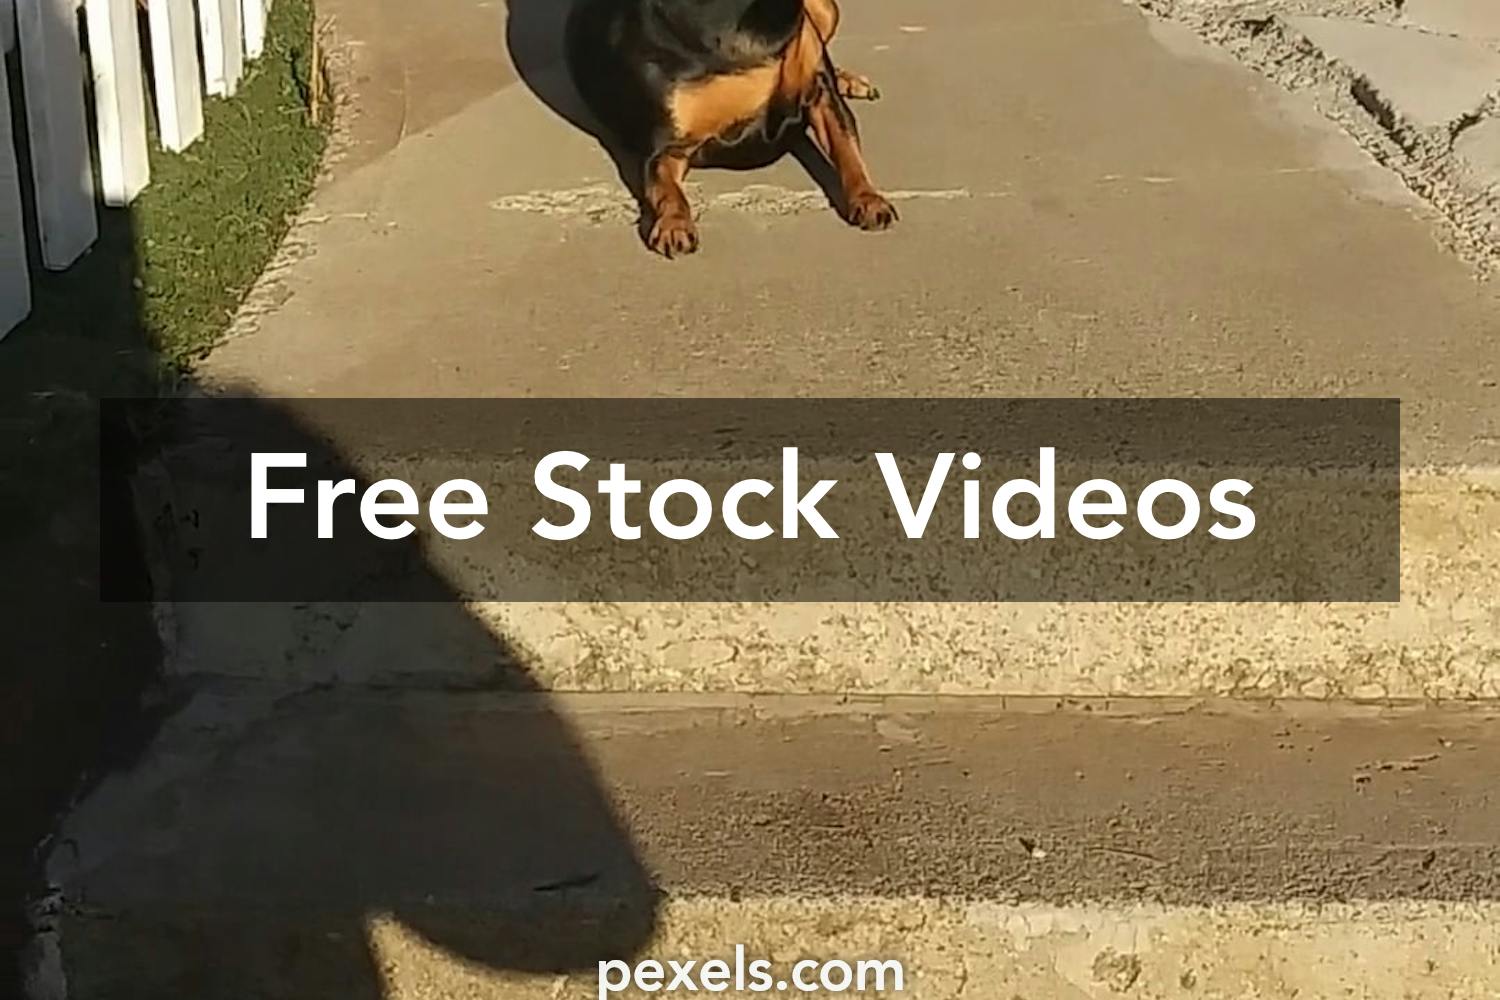 Funny Video Videos, Download The BEST Free 4k Stock Video Footage & Funny  Video HD Video Clips